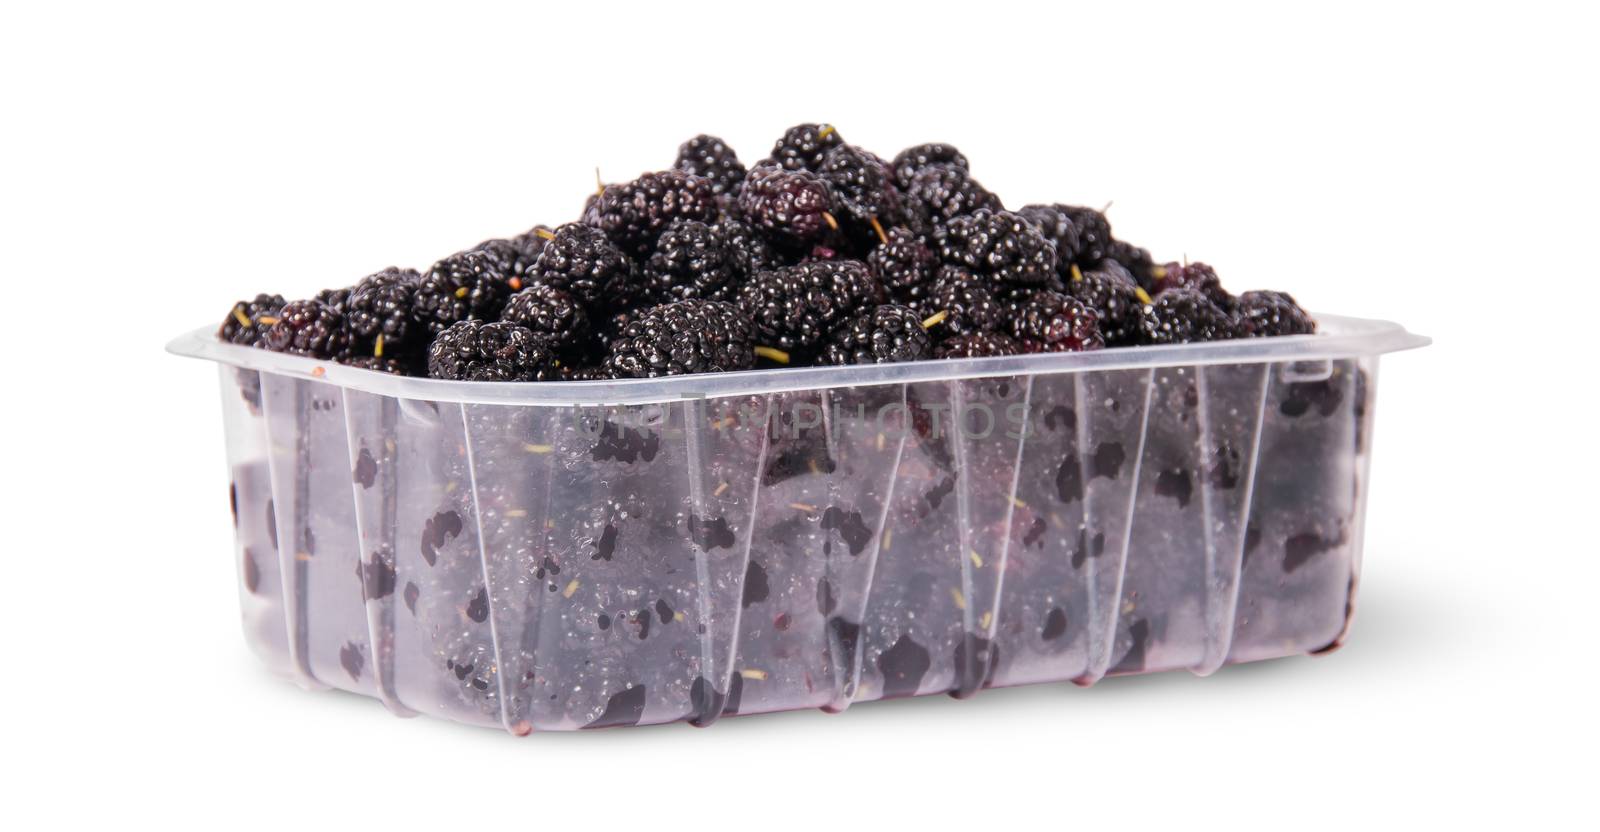 Mulberry in a plastic tray rotated by Cipariss